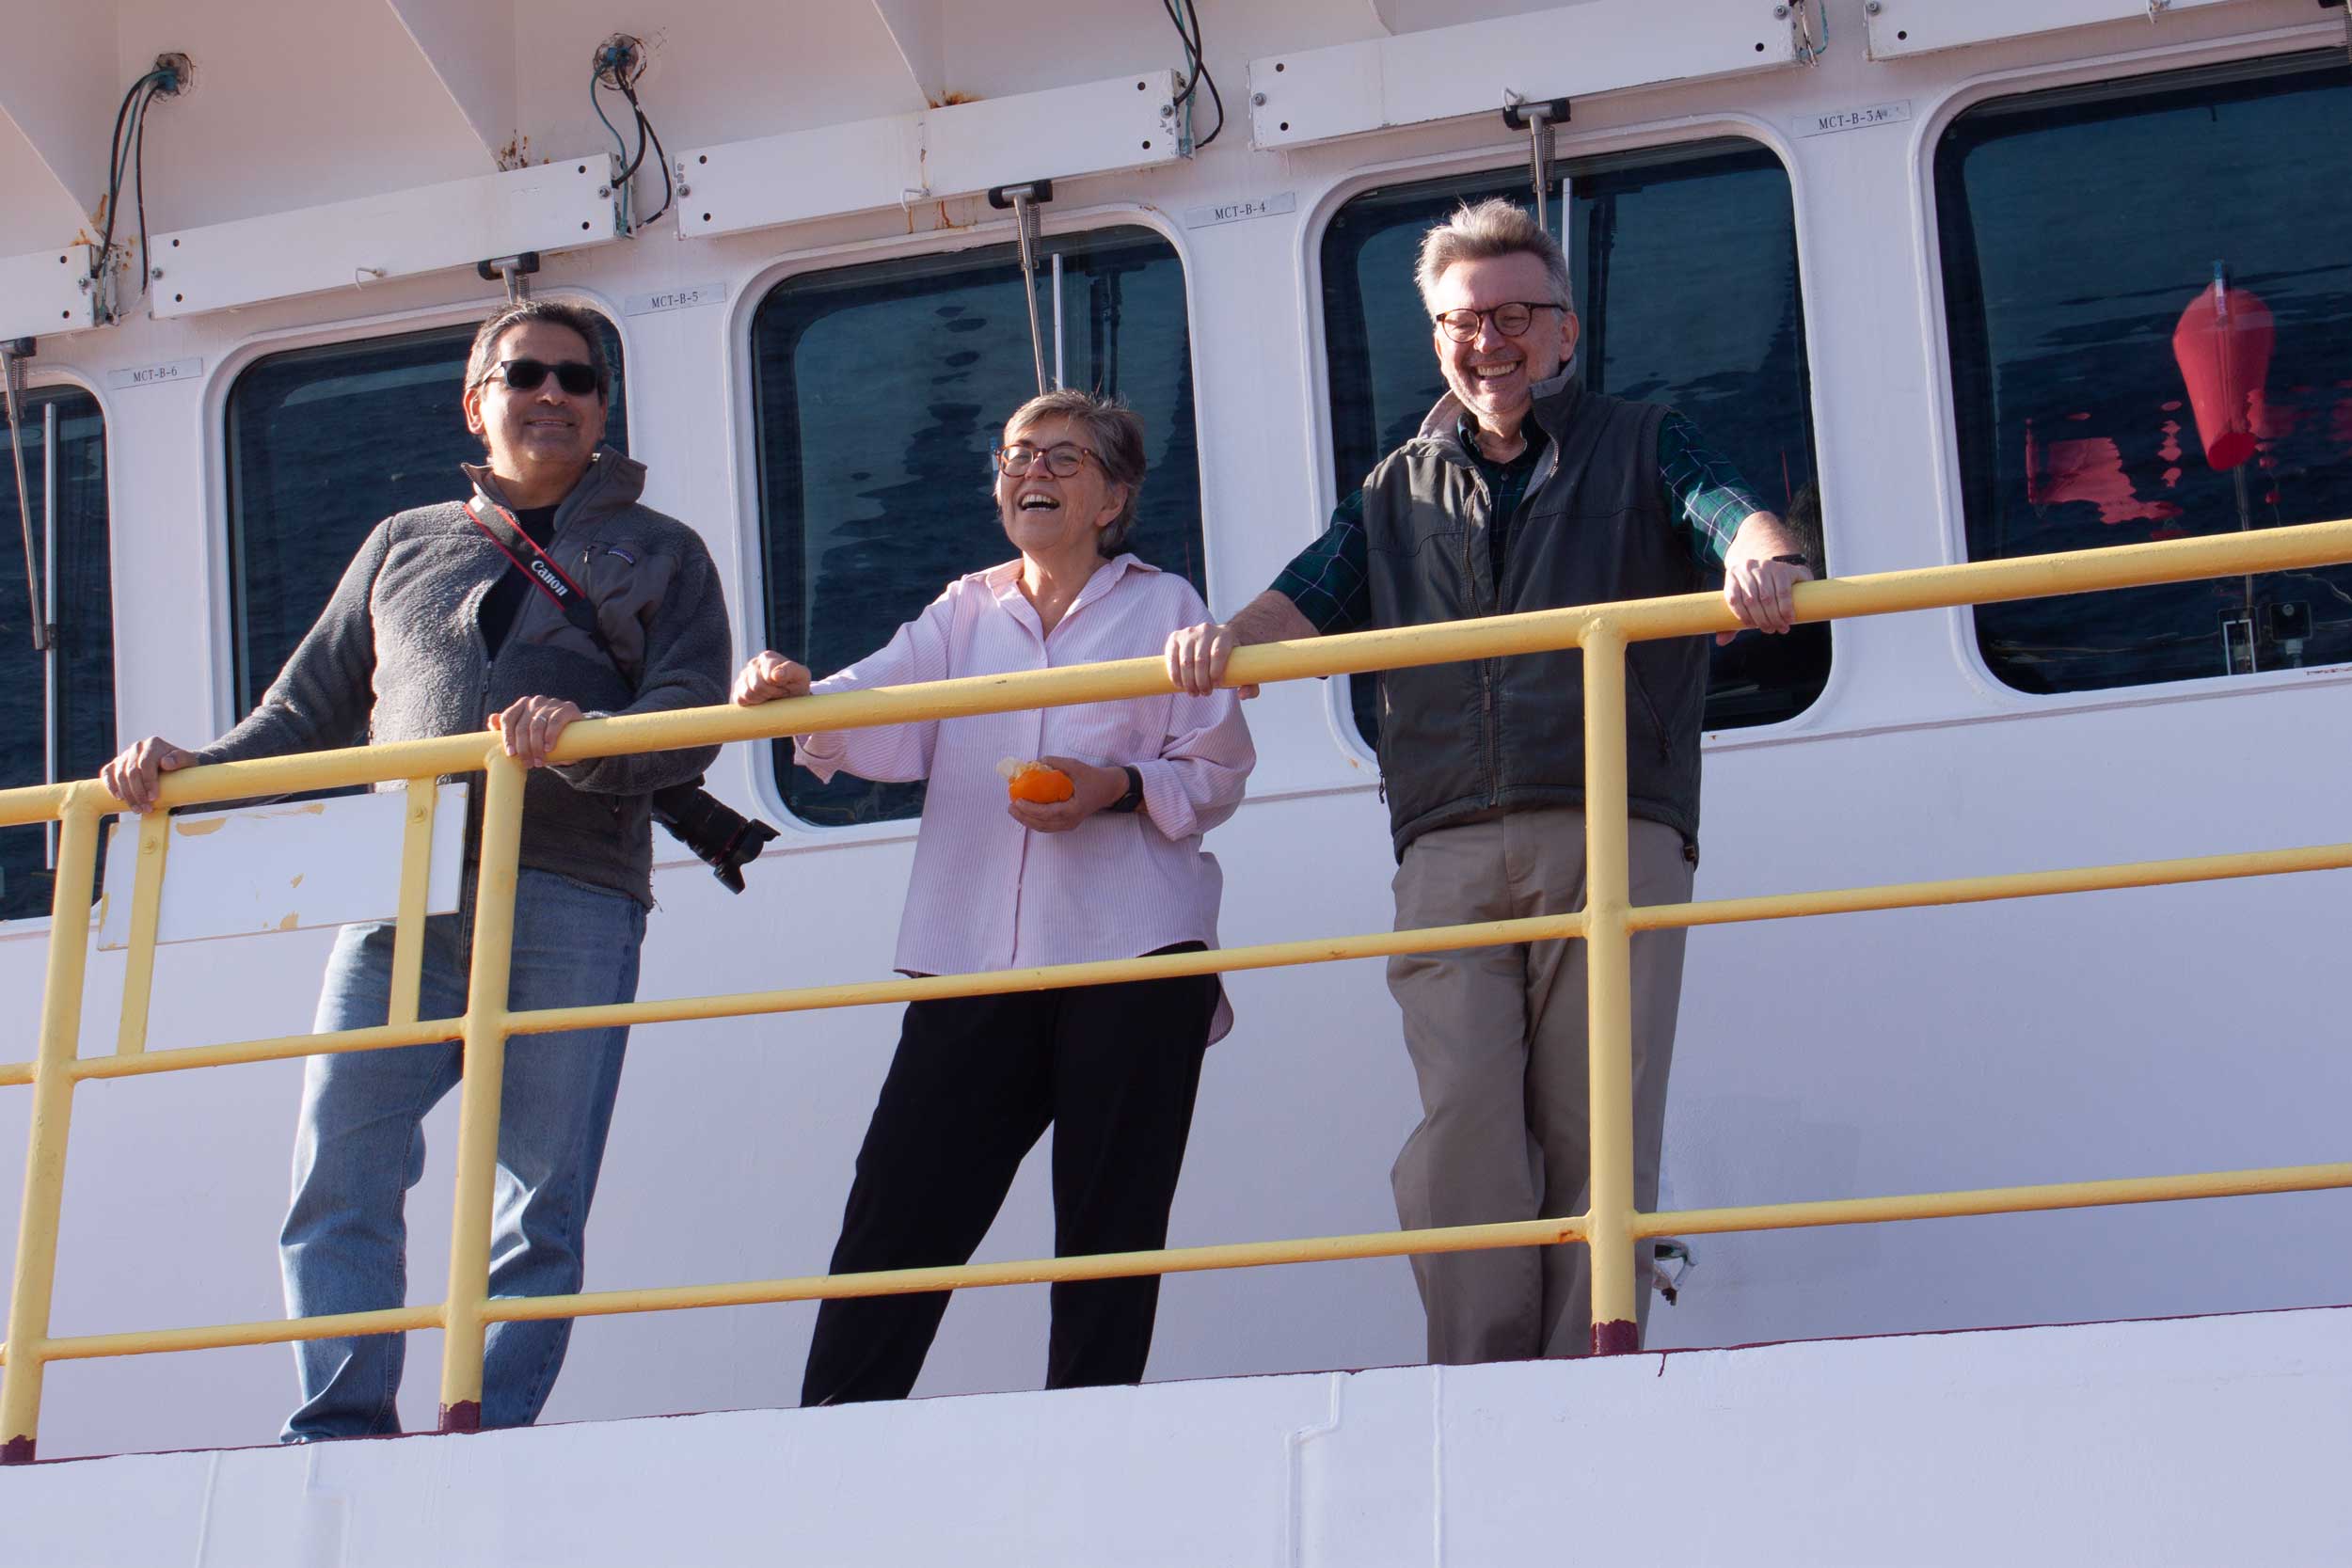 The three leaders of Exp. 397 on the ship's deck.